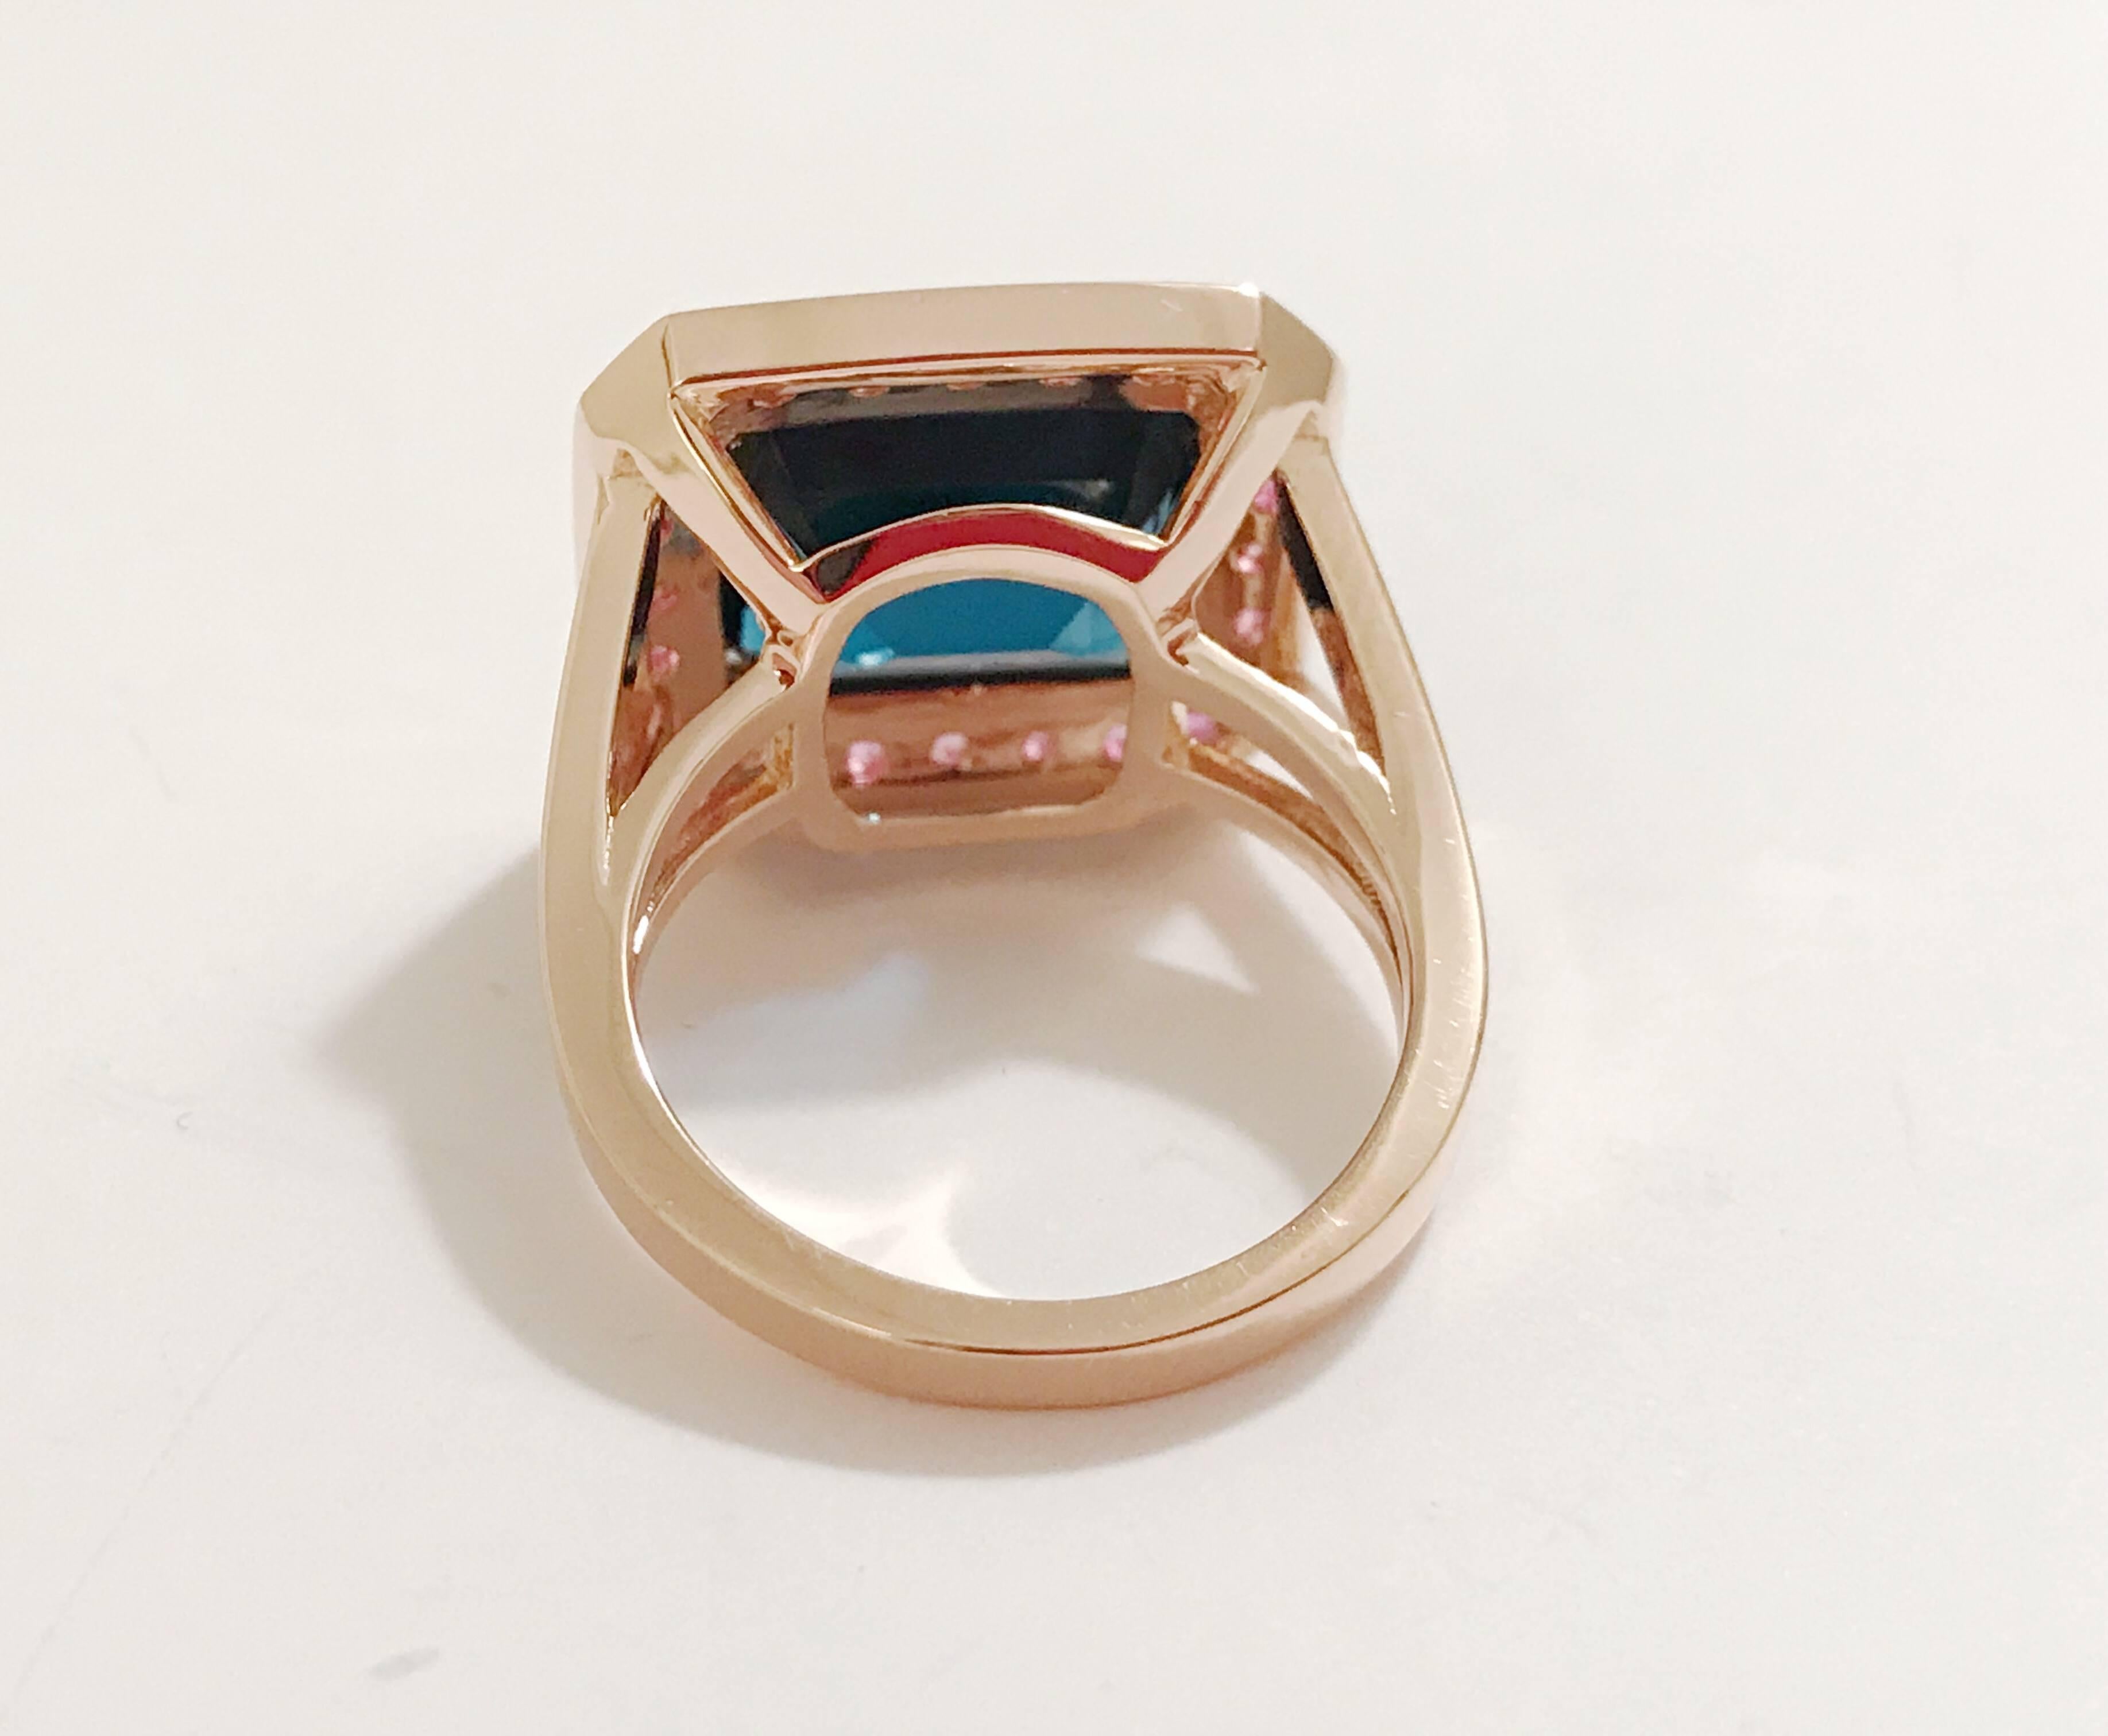 18kt Rose Gold and Split Shank Ring with Emerald Cut Dark Blue Topaz Center Stone with surrounding Pink Sapphires is an elegant cocktail ring. Measures 0.75 across the top.

This Ring can be made with any color center stone as well as type of